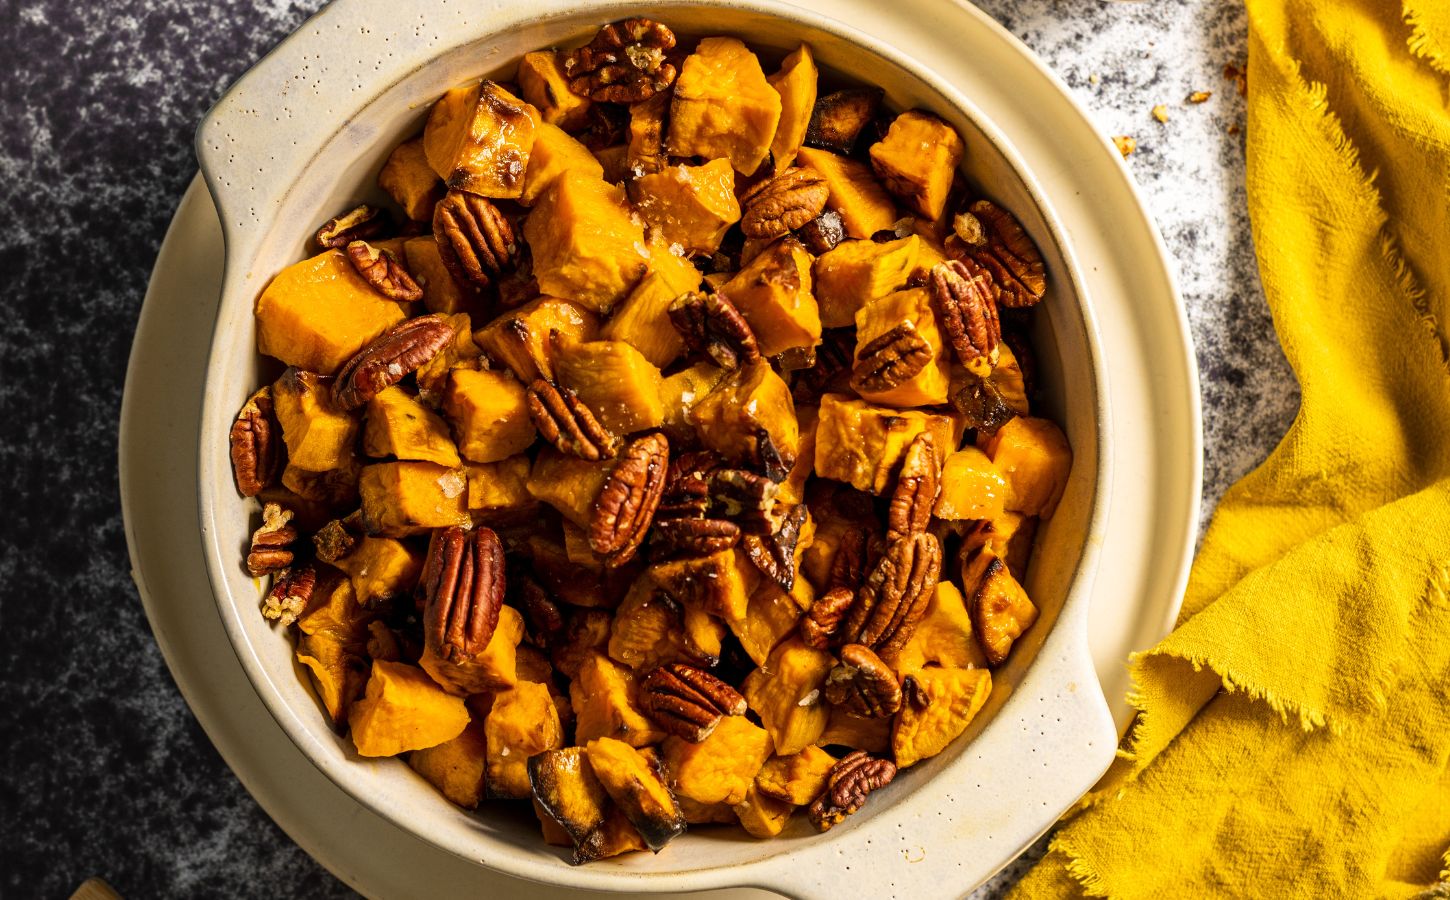 Maple Roasted Sweet Potatoes from Romy London